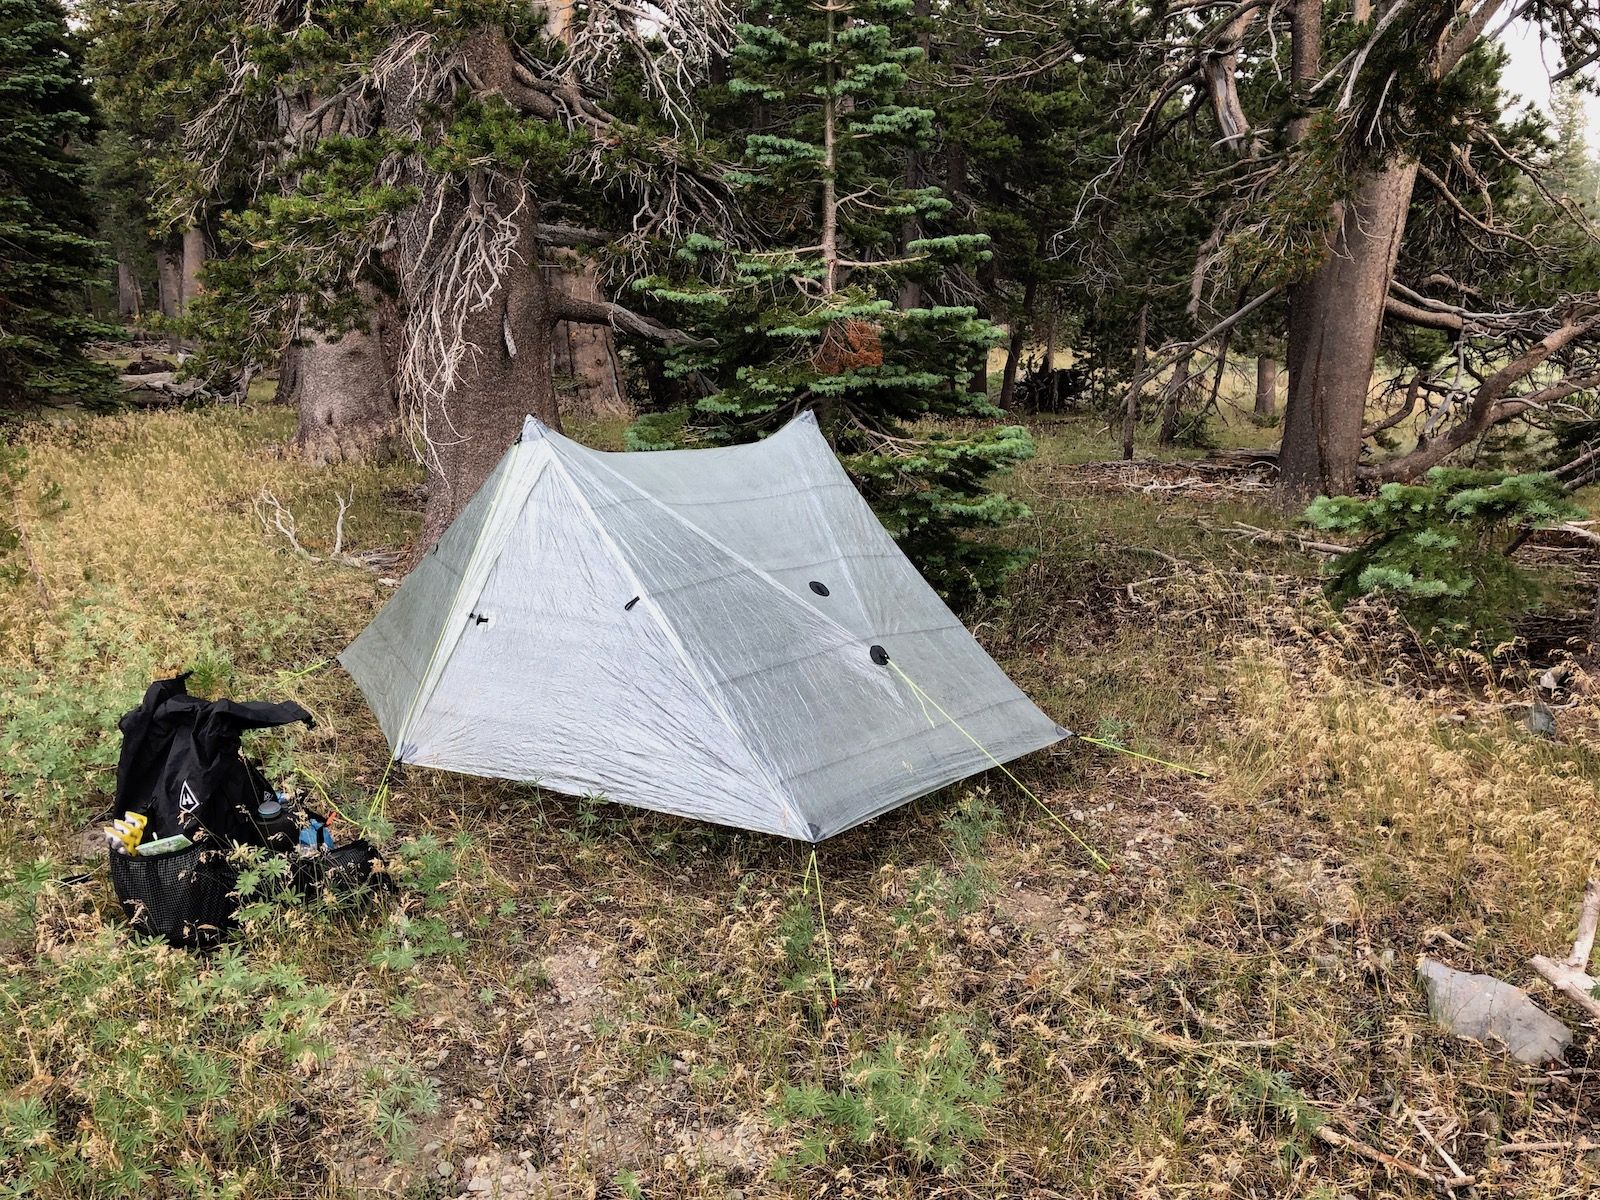 Tent tucked in under trees at South Camp Peak.